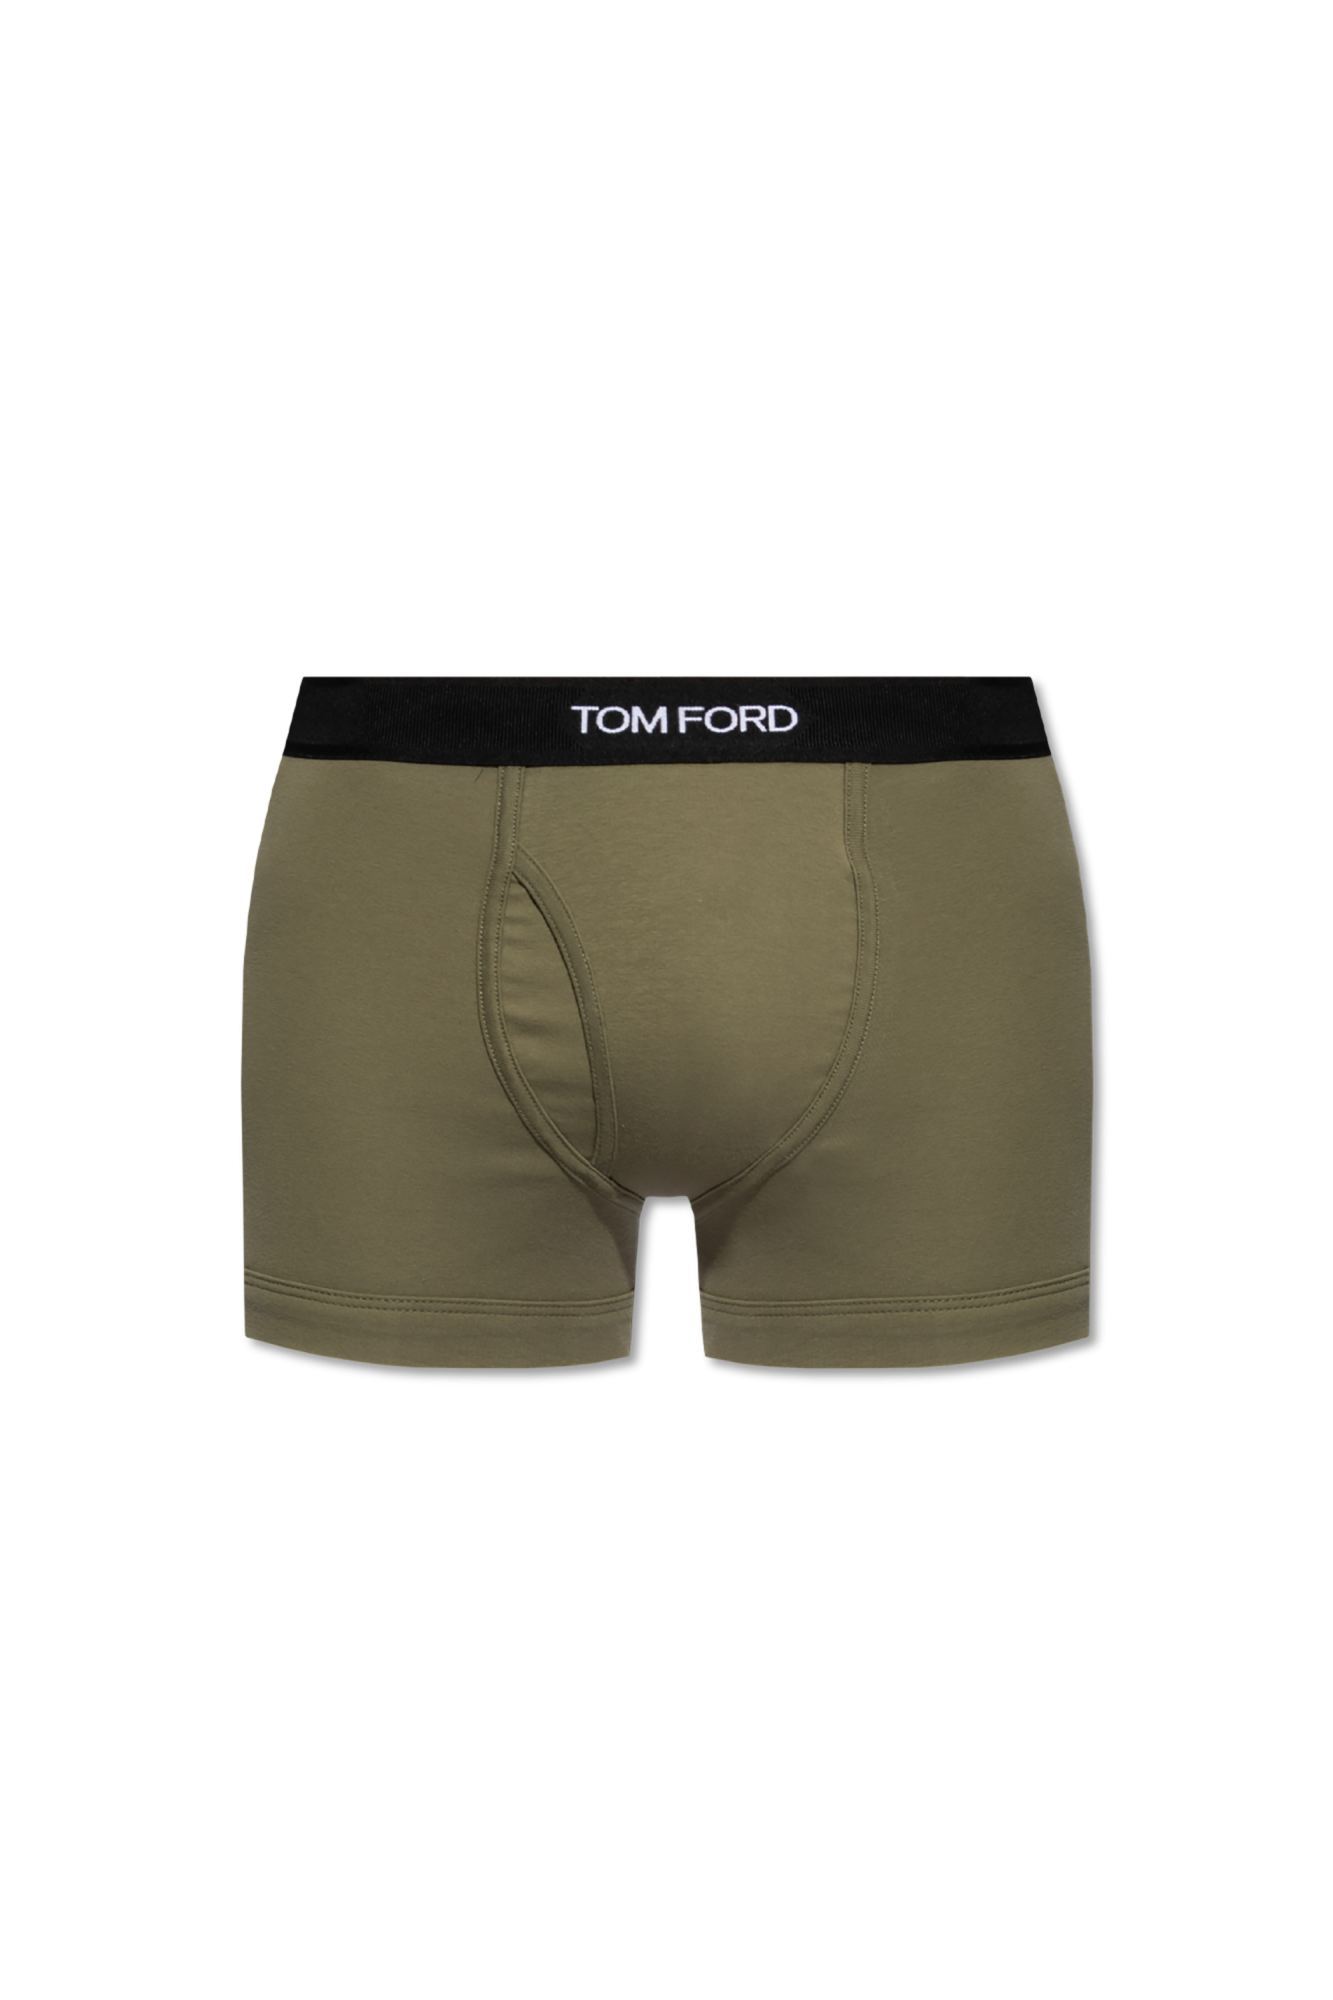 Tom Ford Cotton Boxers